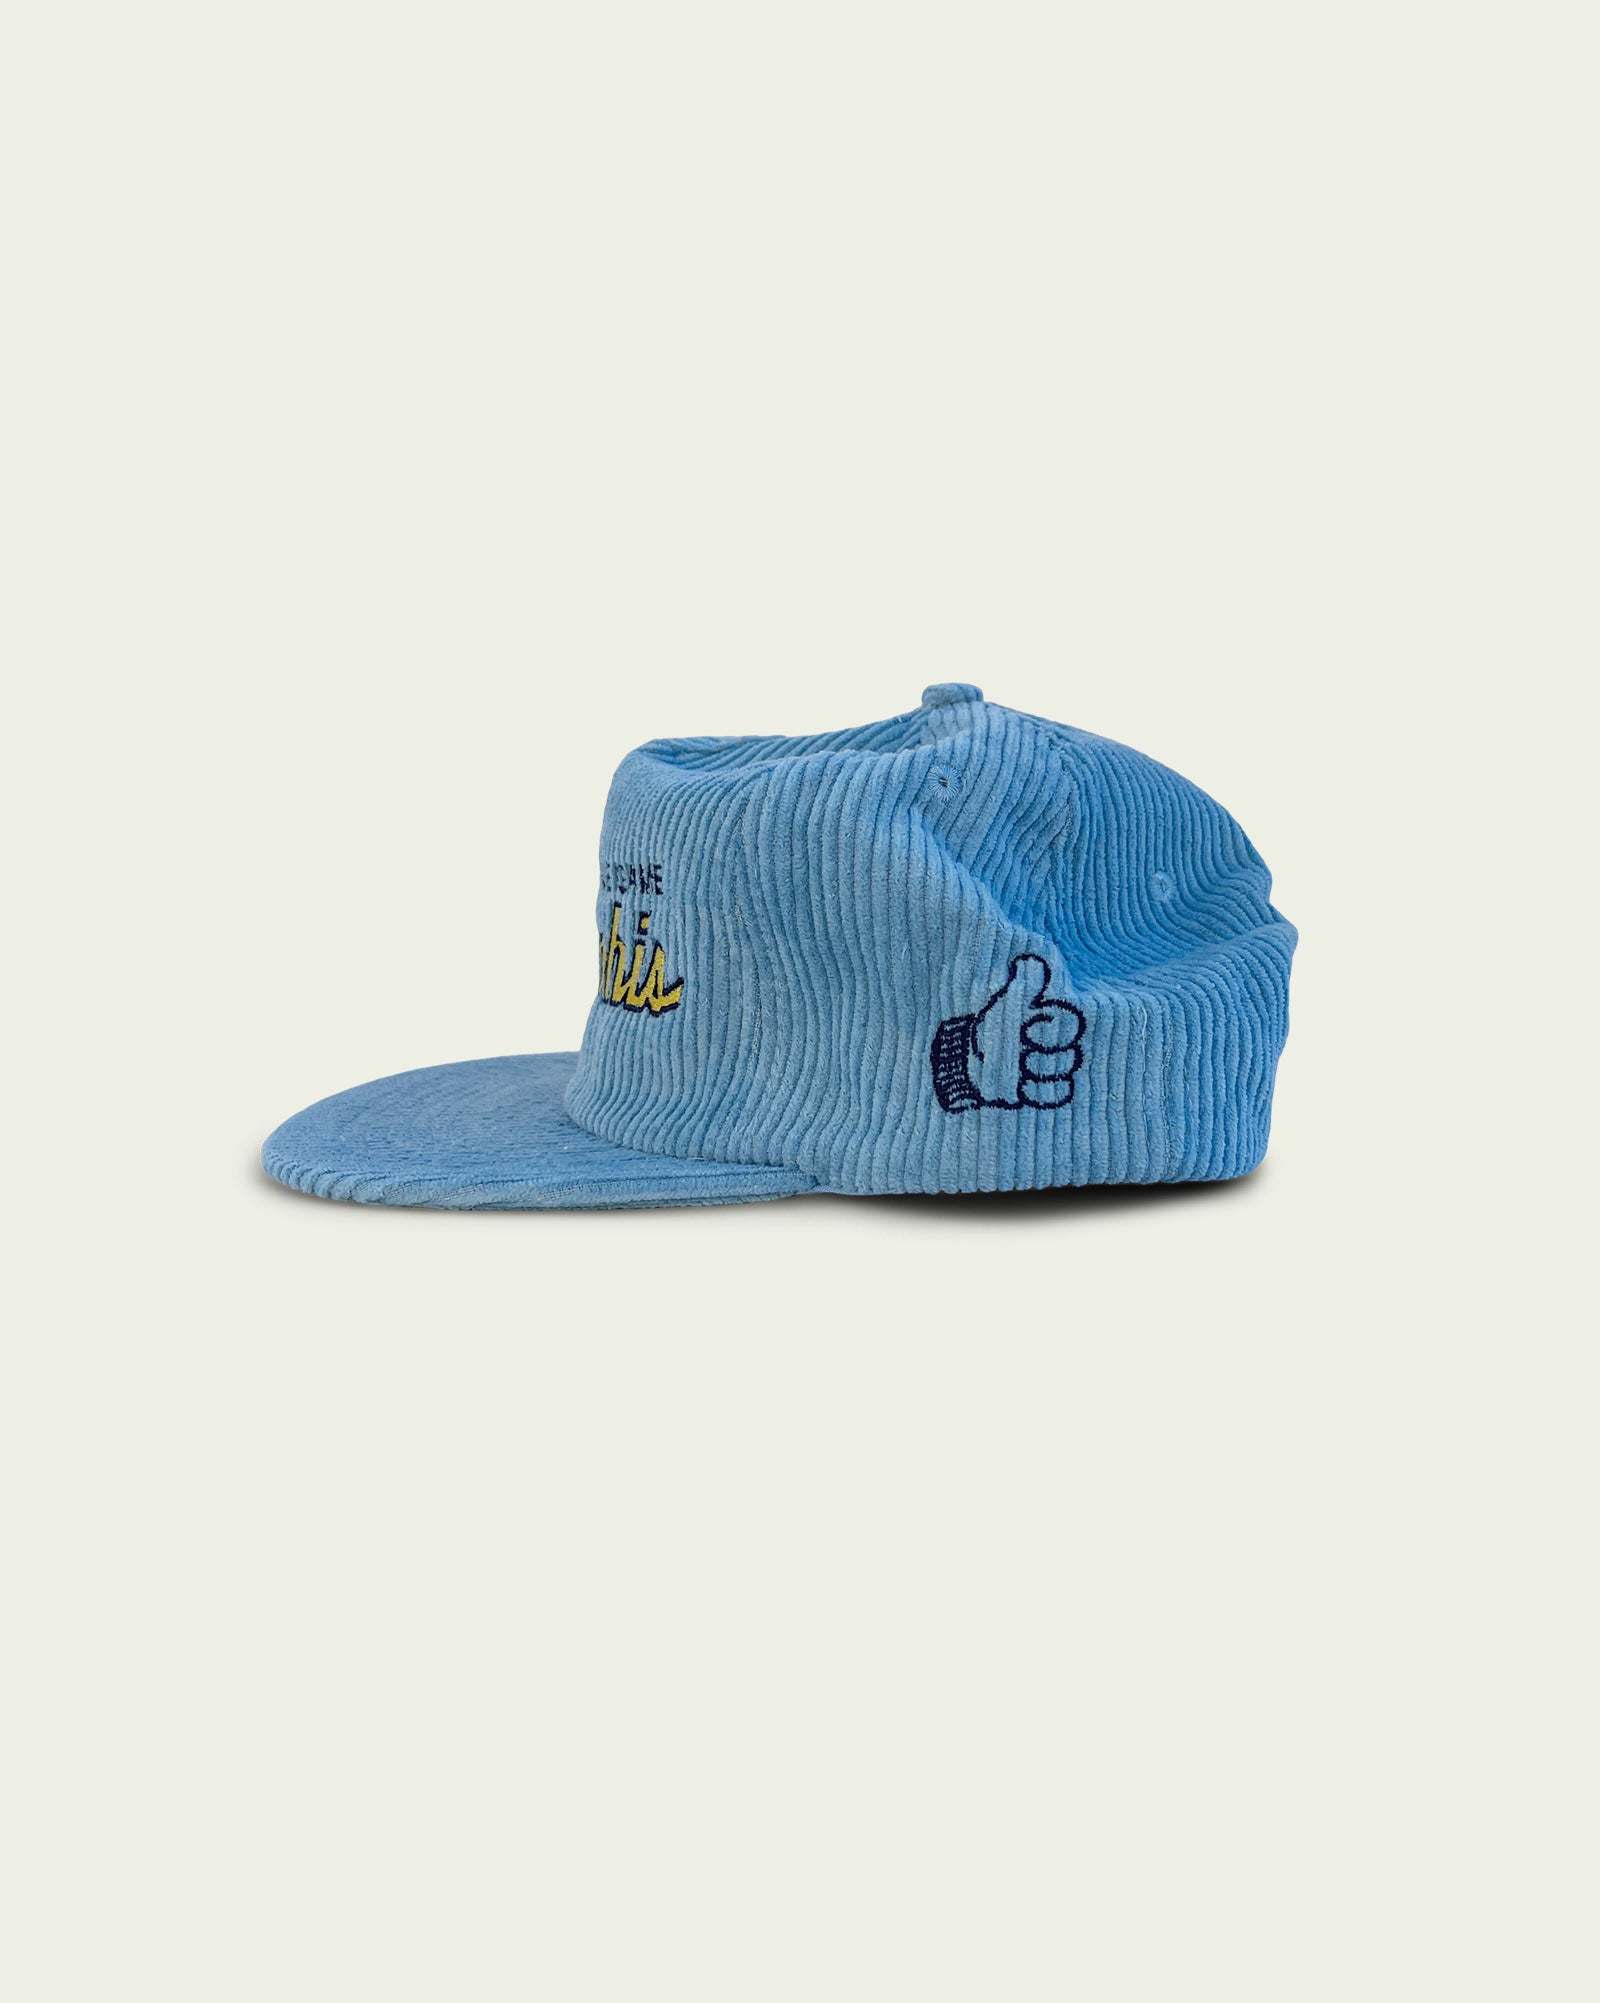 Have A Nice Game® Memphis Corduroy Snapback Hat